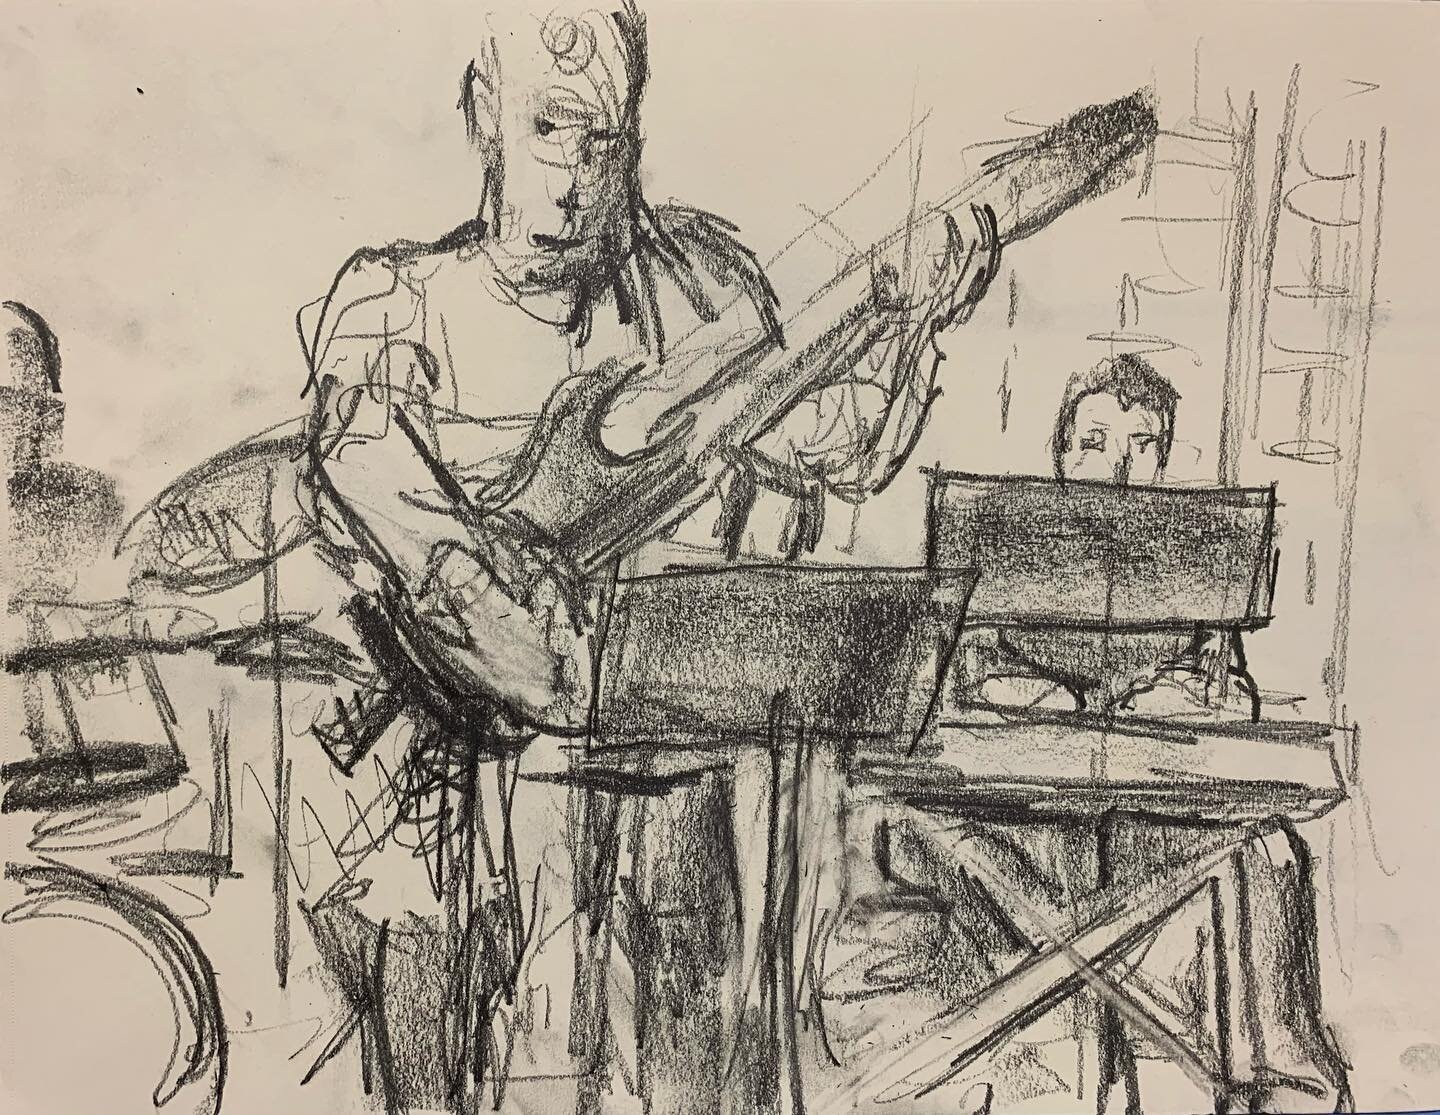 Clayton Farris, son of Kirk Farris, is the pianist with his jazz combo at Cafe Brazil #cafebrazil #quicksketch #houstonlife #houstonartist